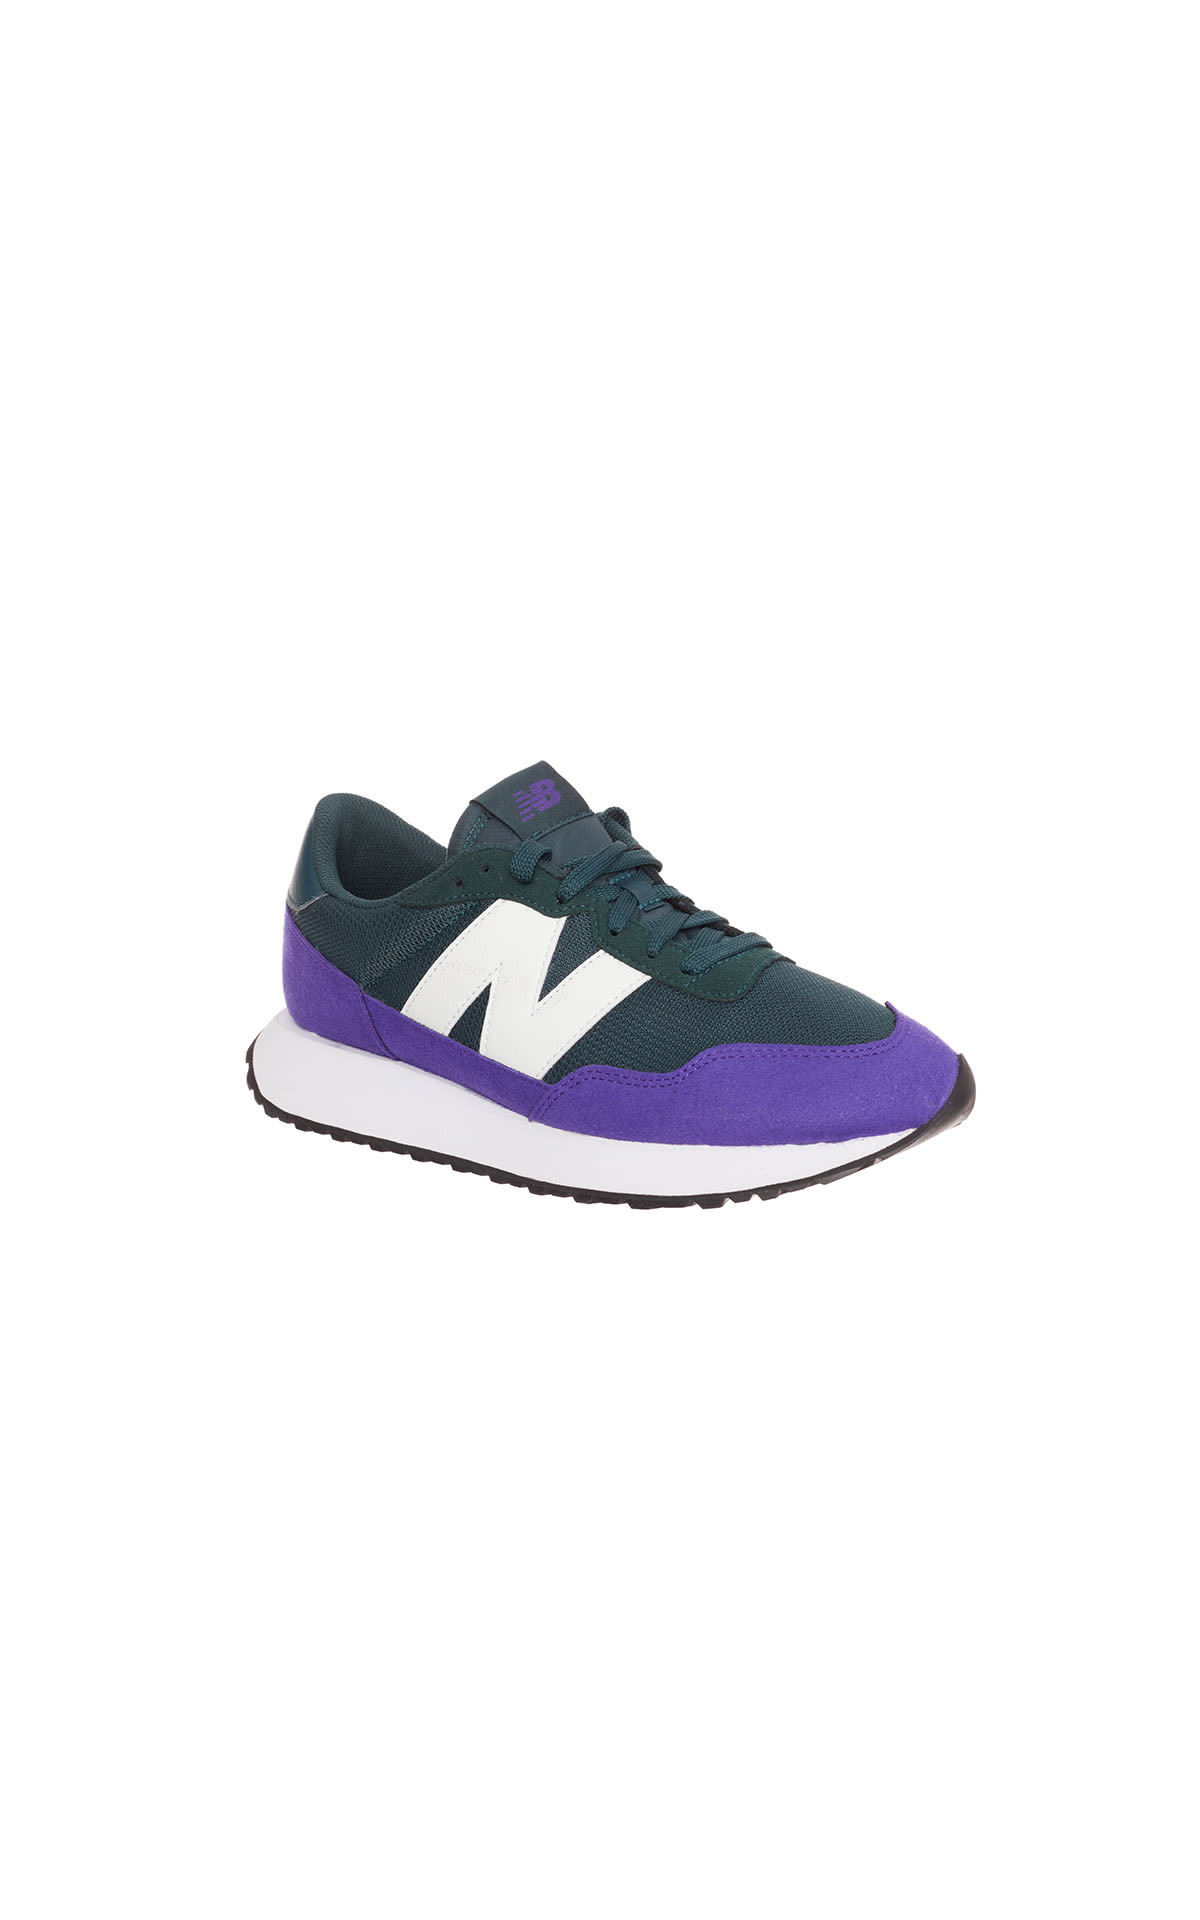 New Balance 237 sneaker from Bicester Village